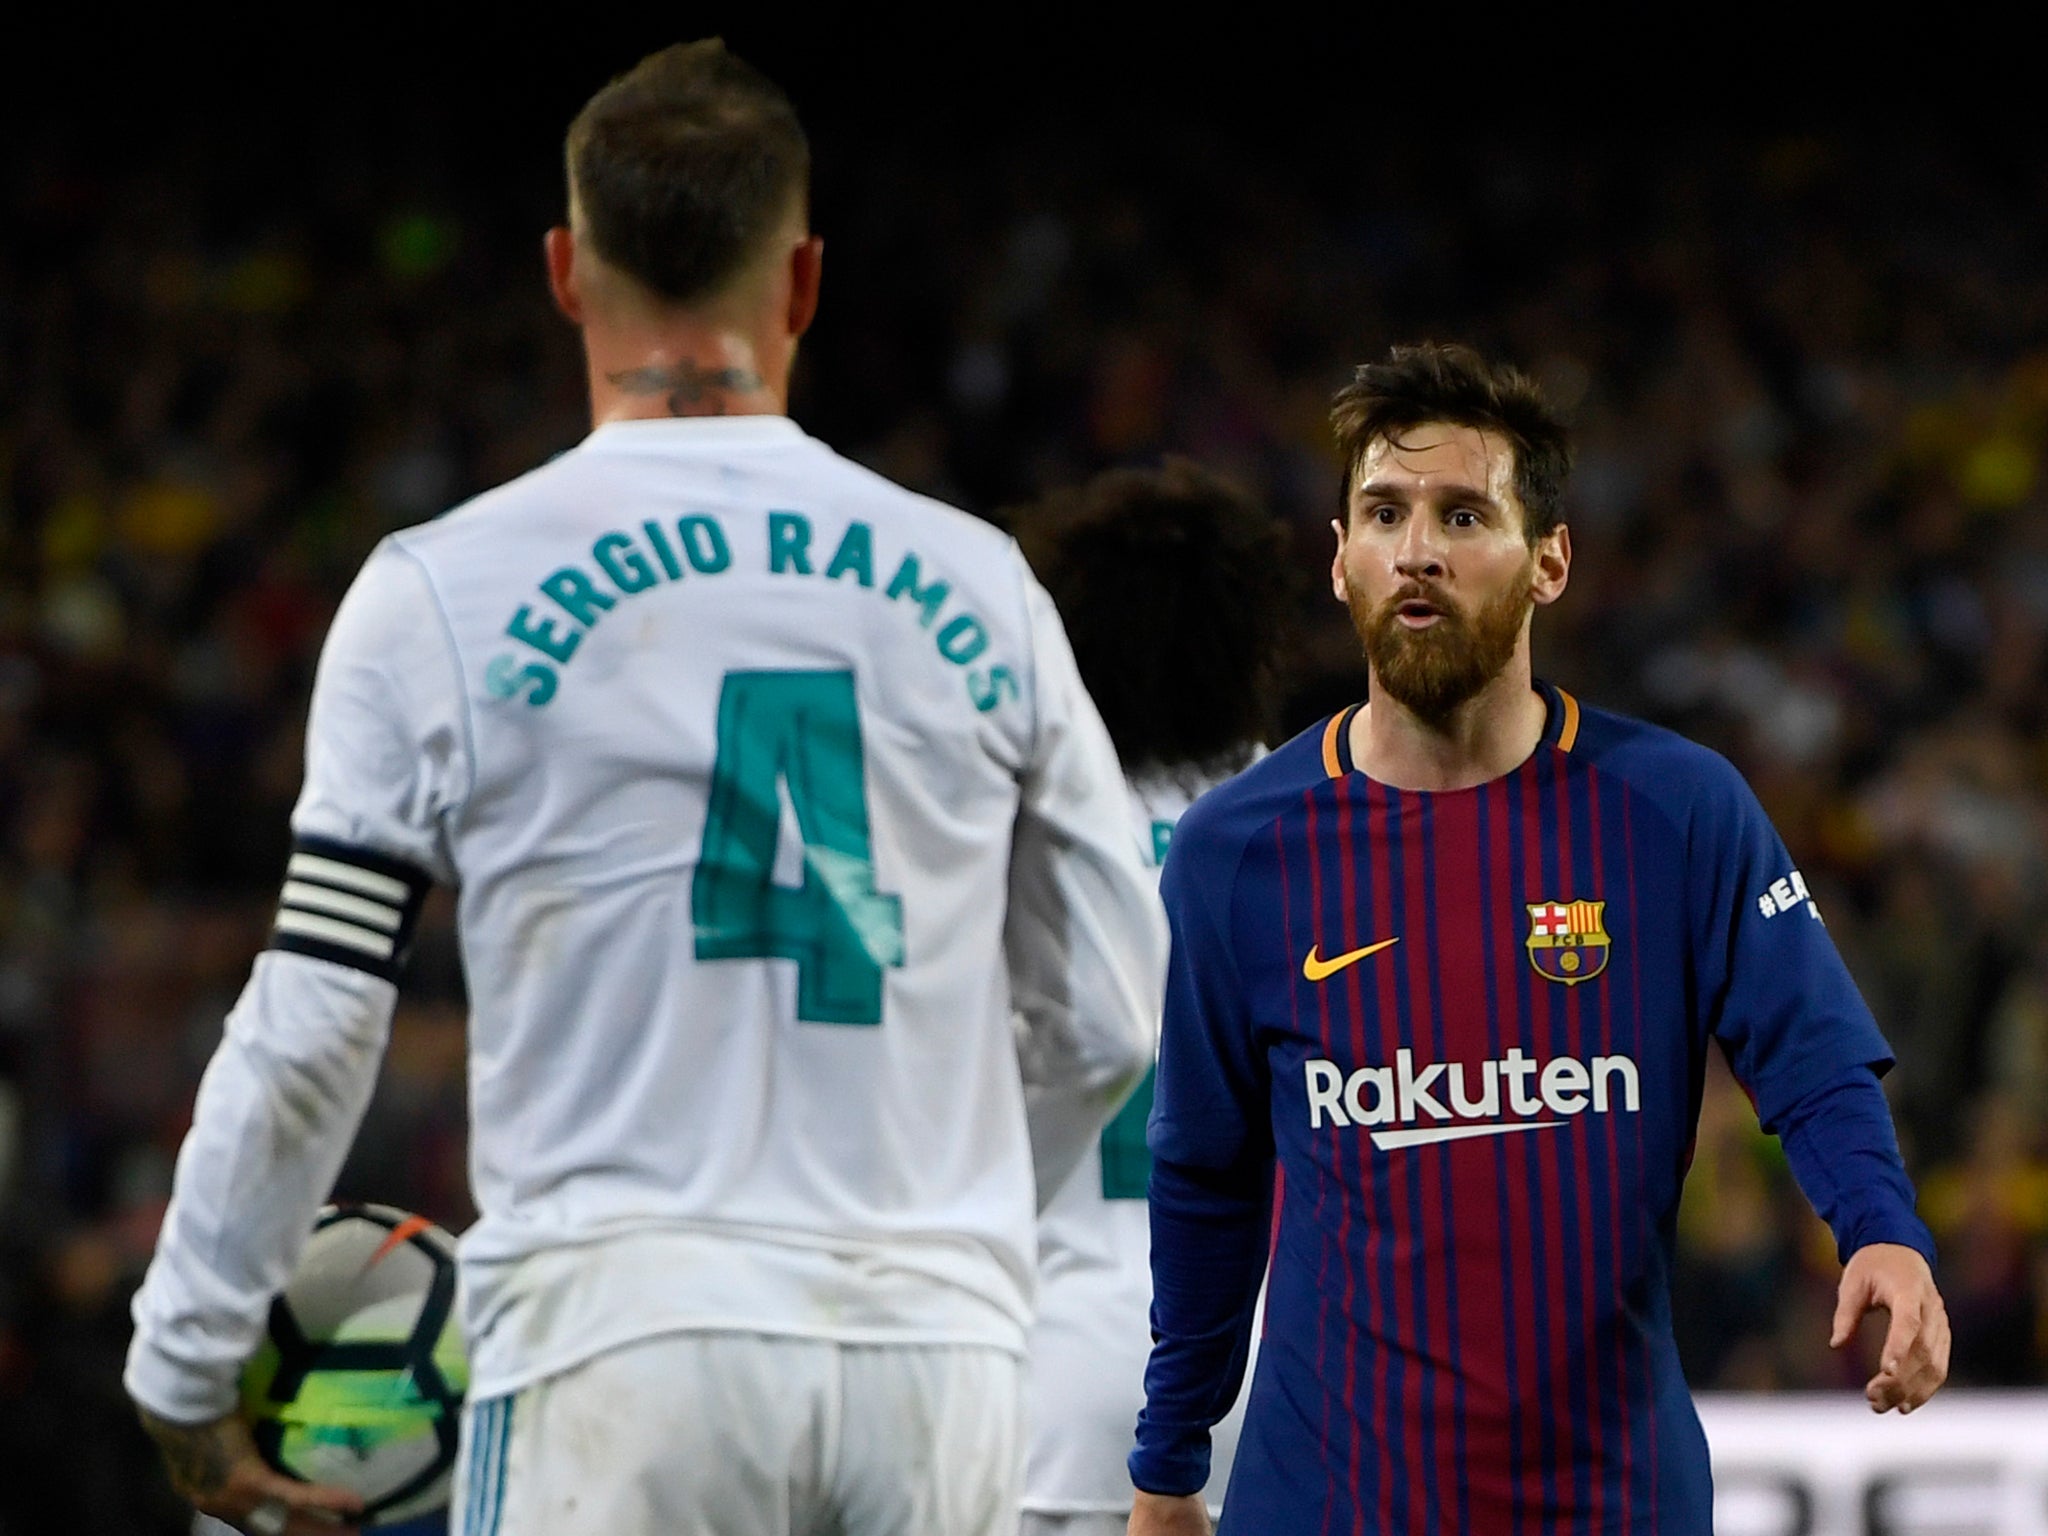 Sergio Ramos accused Lionel Messi of trying to put pressure on the referee during Sunday's El Clasico draw